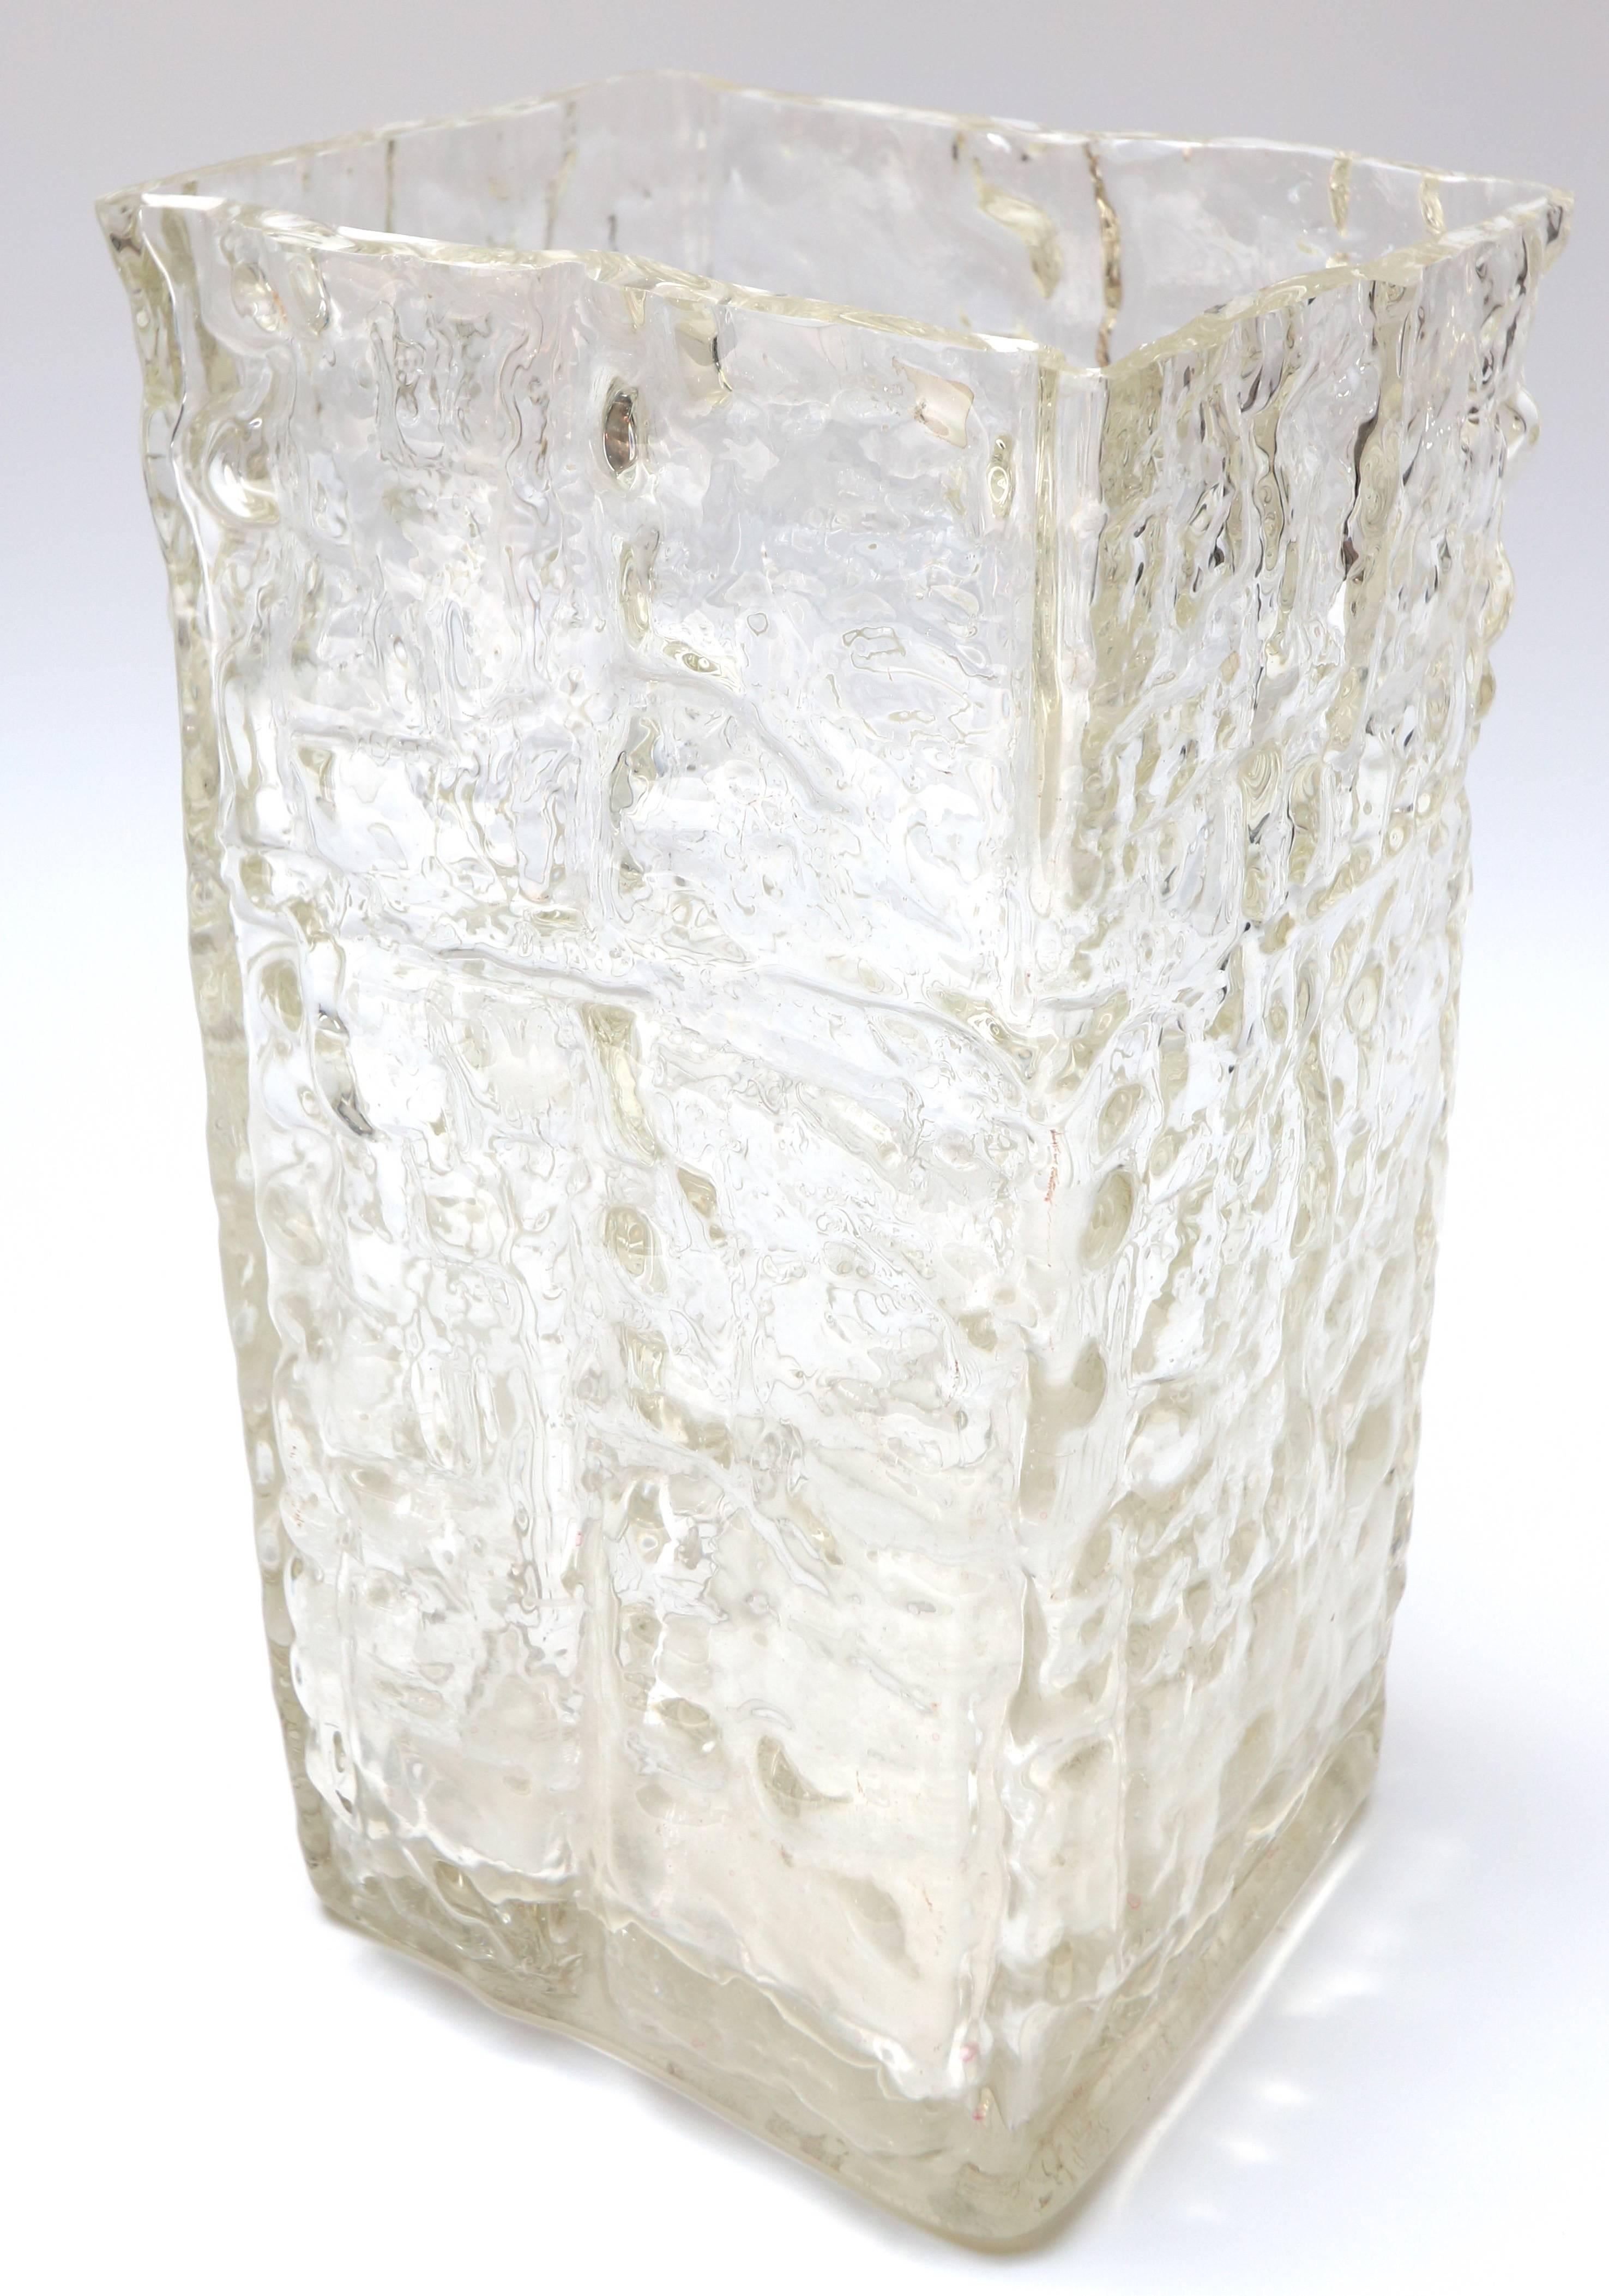 Textured clear glass vase by Girandi from the 1960s.